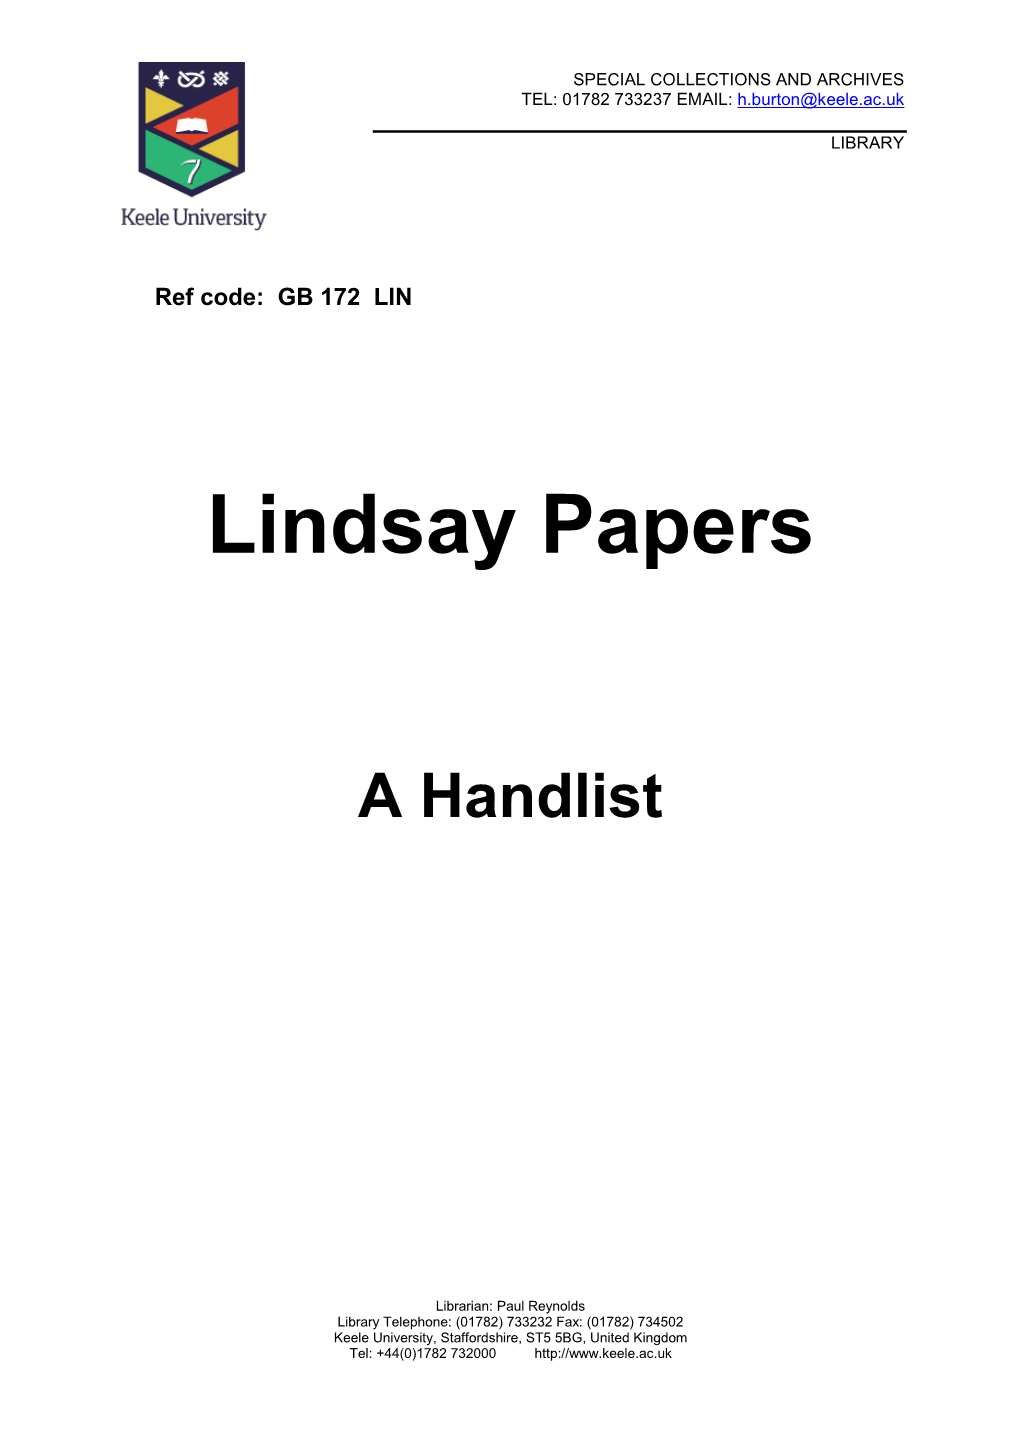 Lindsay Papers